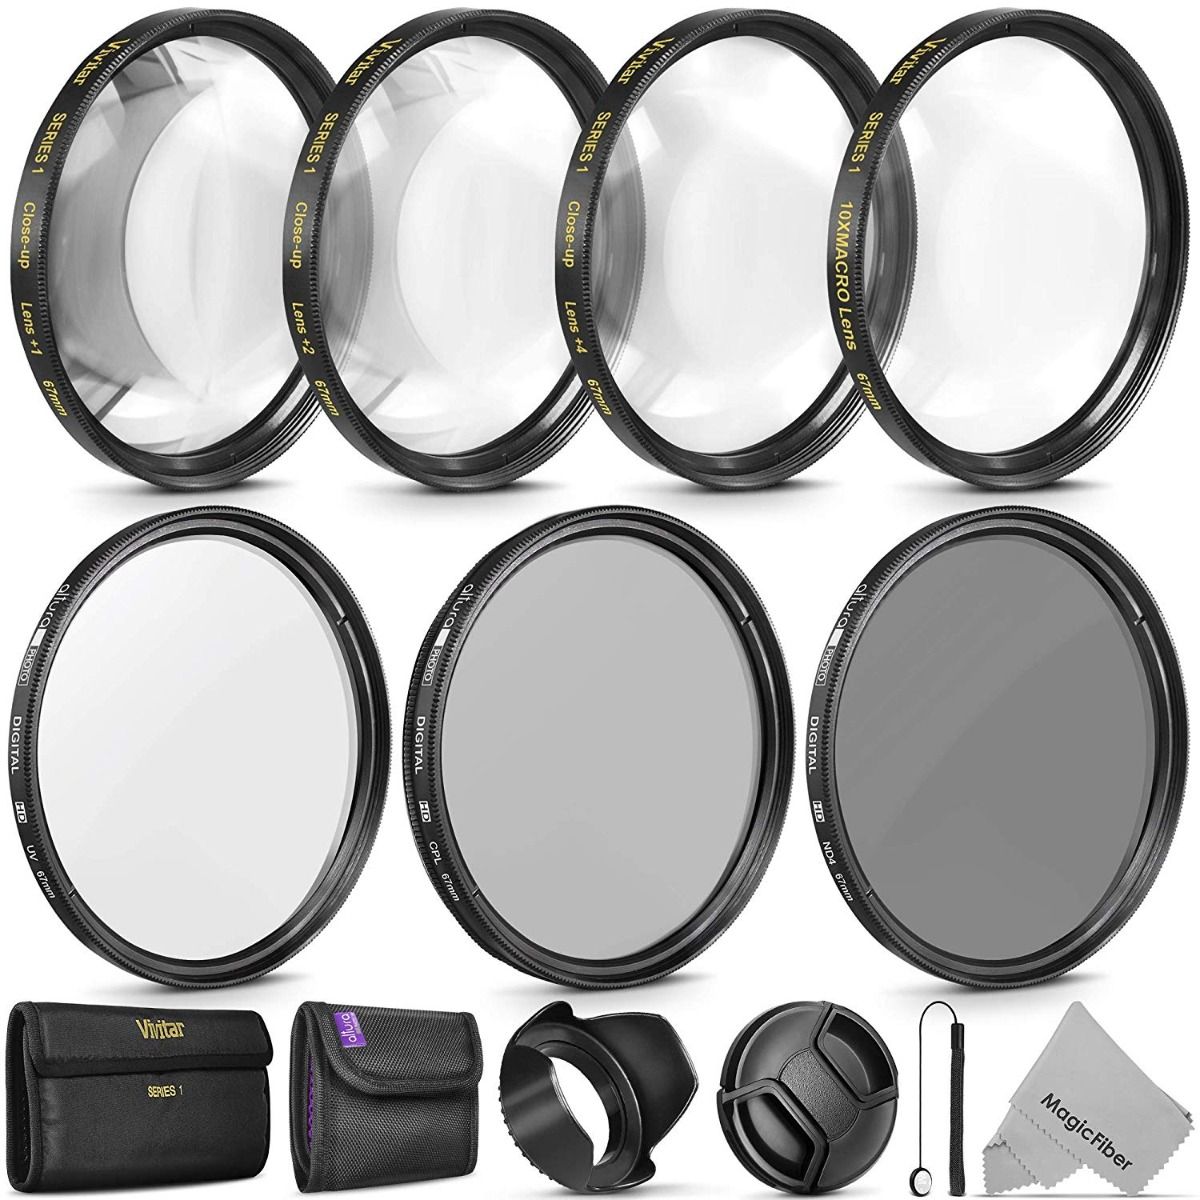 Includes Filters Lens Hood & More Remote 55mm UltraPro Professional Filter Bundle for Lenses with a 55mm Filter Size 